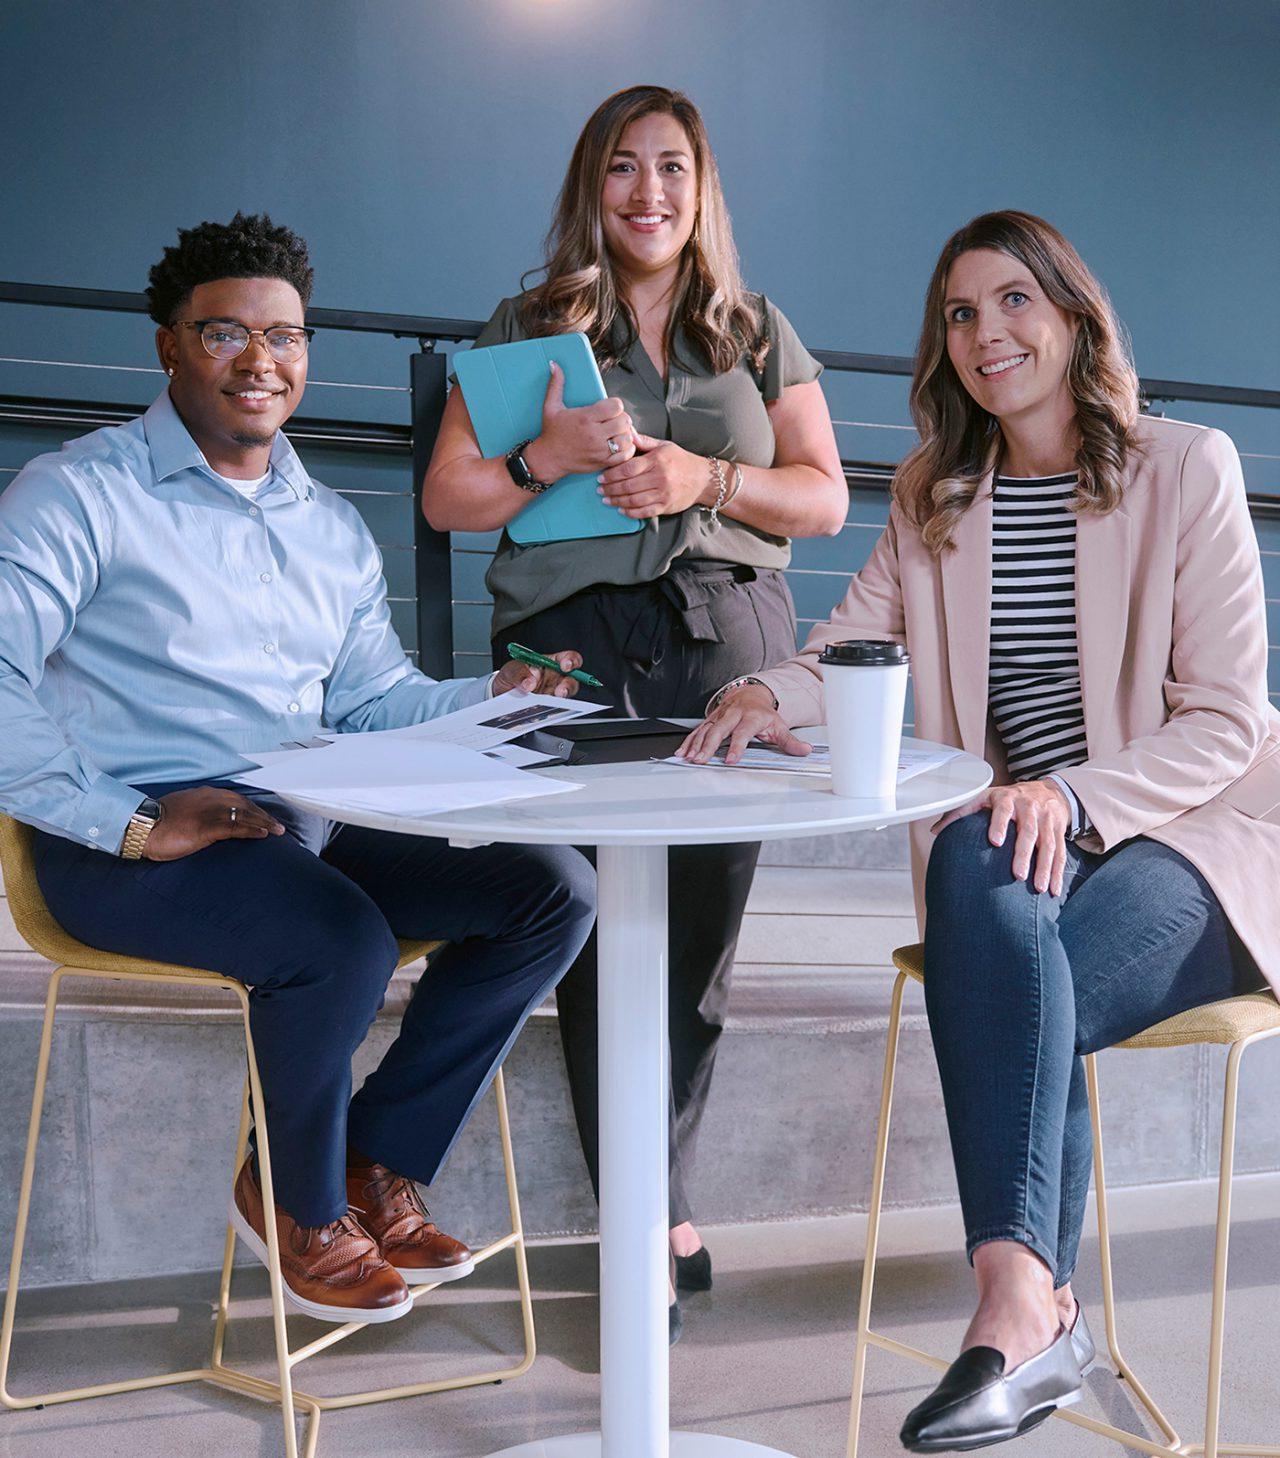 Two female employees and one male employee smiling and gathered around a tall white table.